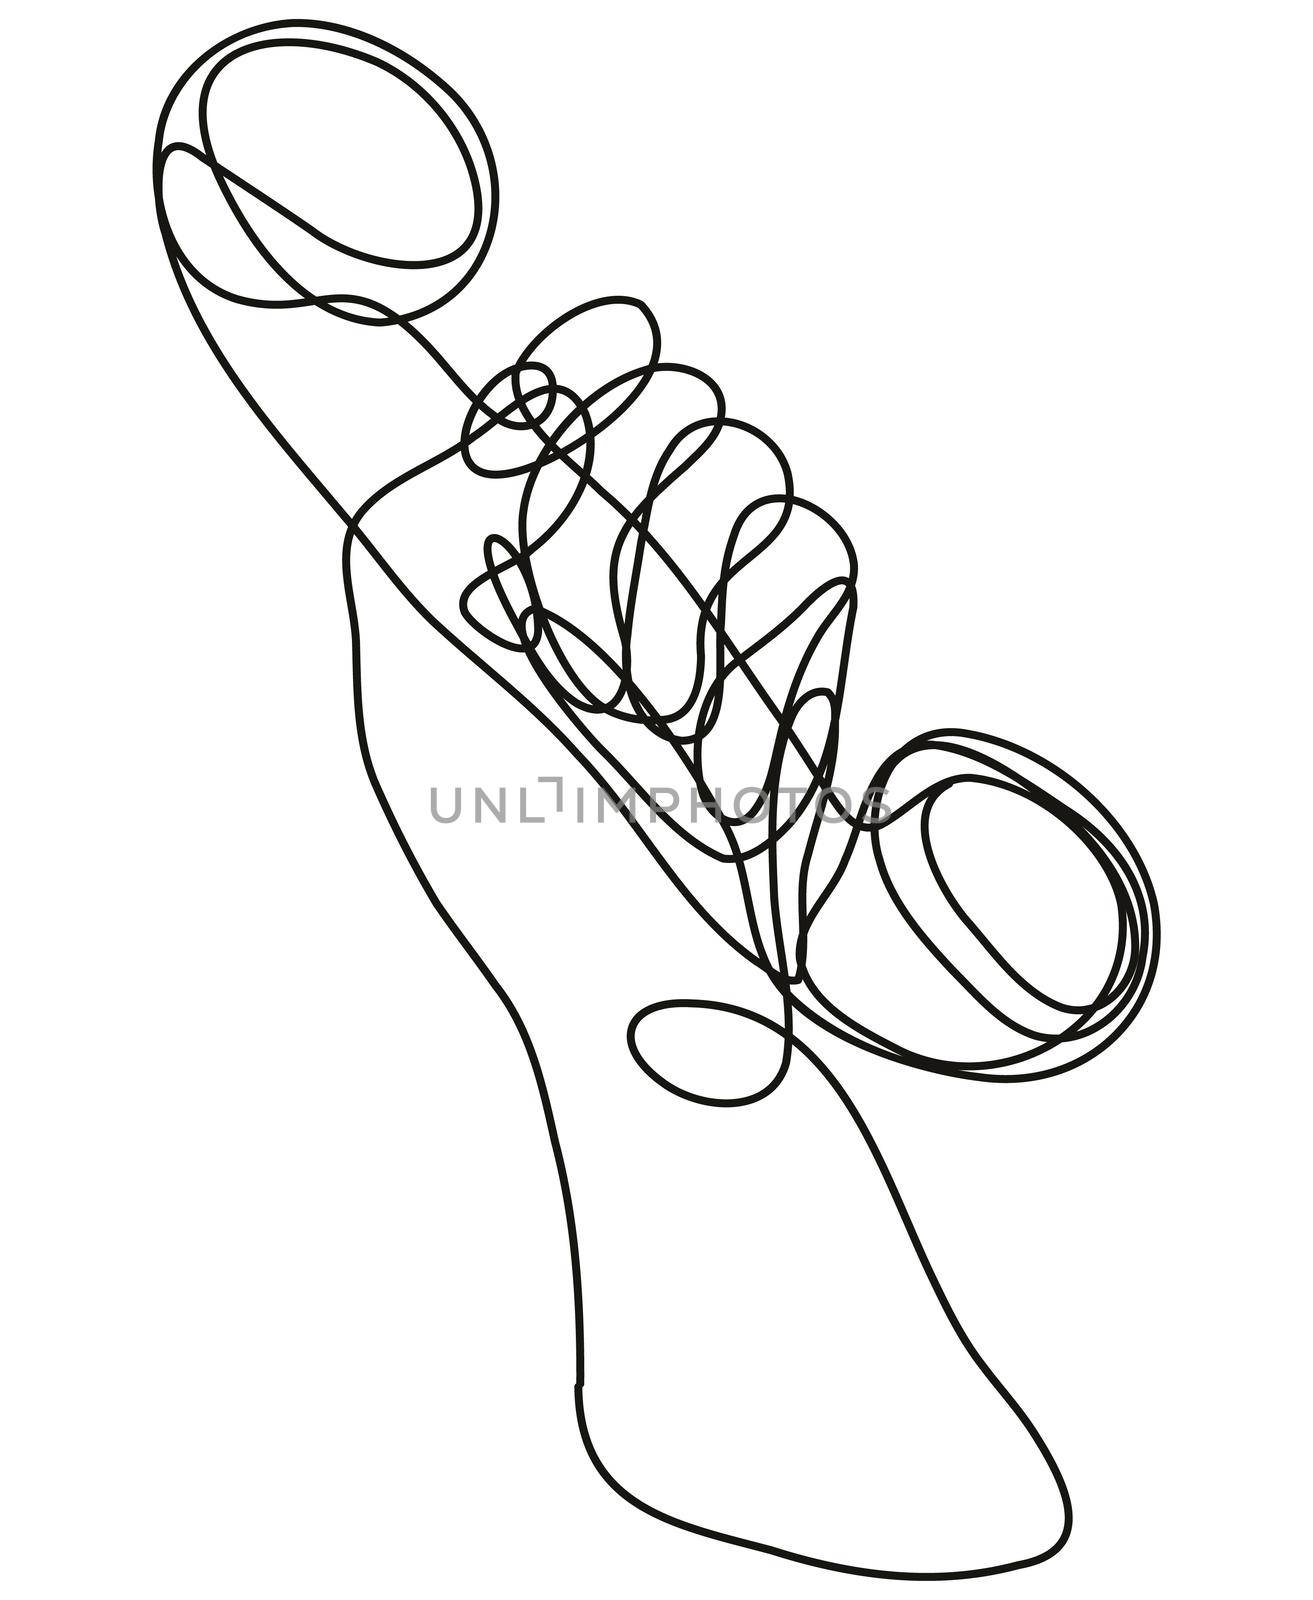 Continuous line drawing illustration of a hand holding a vintage telephone done in mono line or doodle style in black and white on isolated background. 